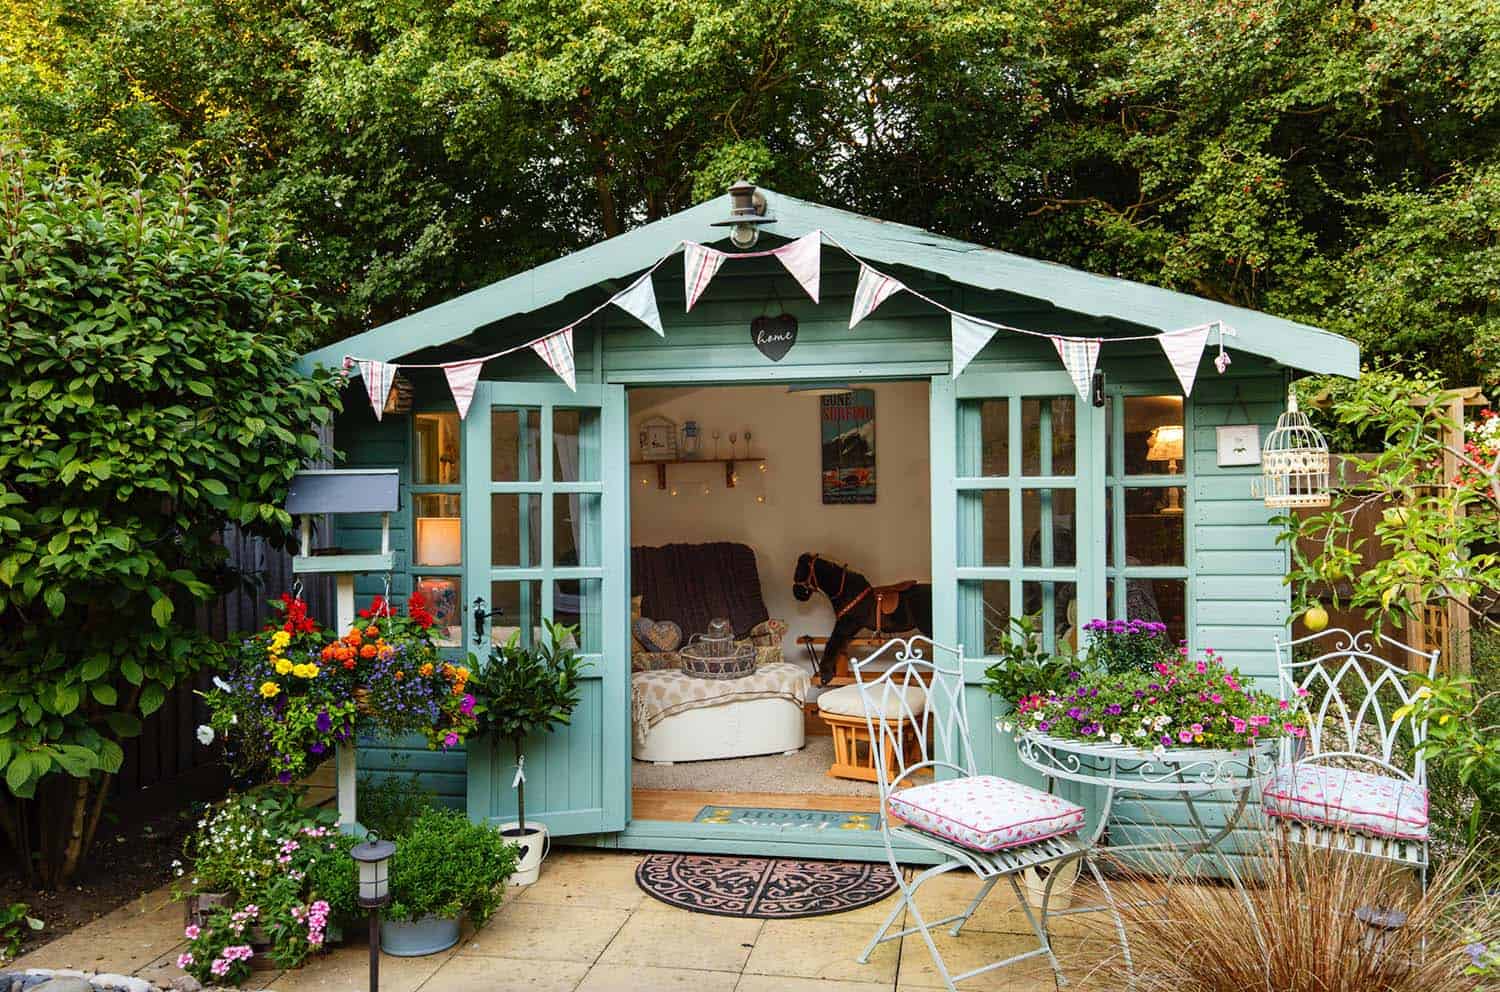 Your Personal Oasis: 26 She Shed Ideas - DigsDigs